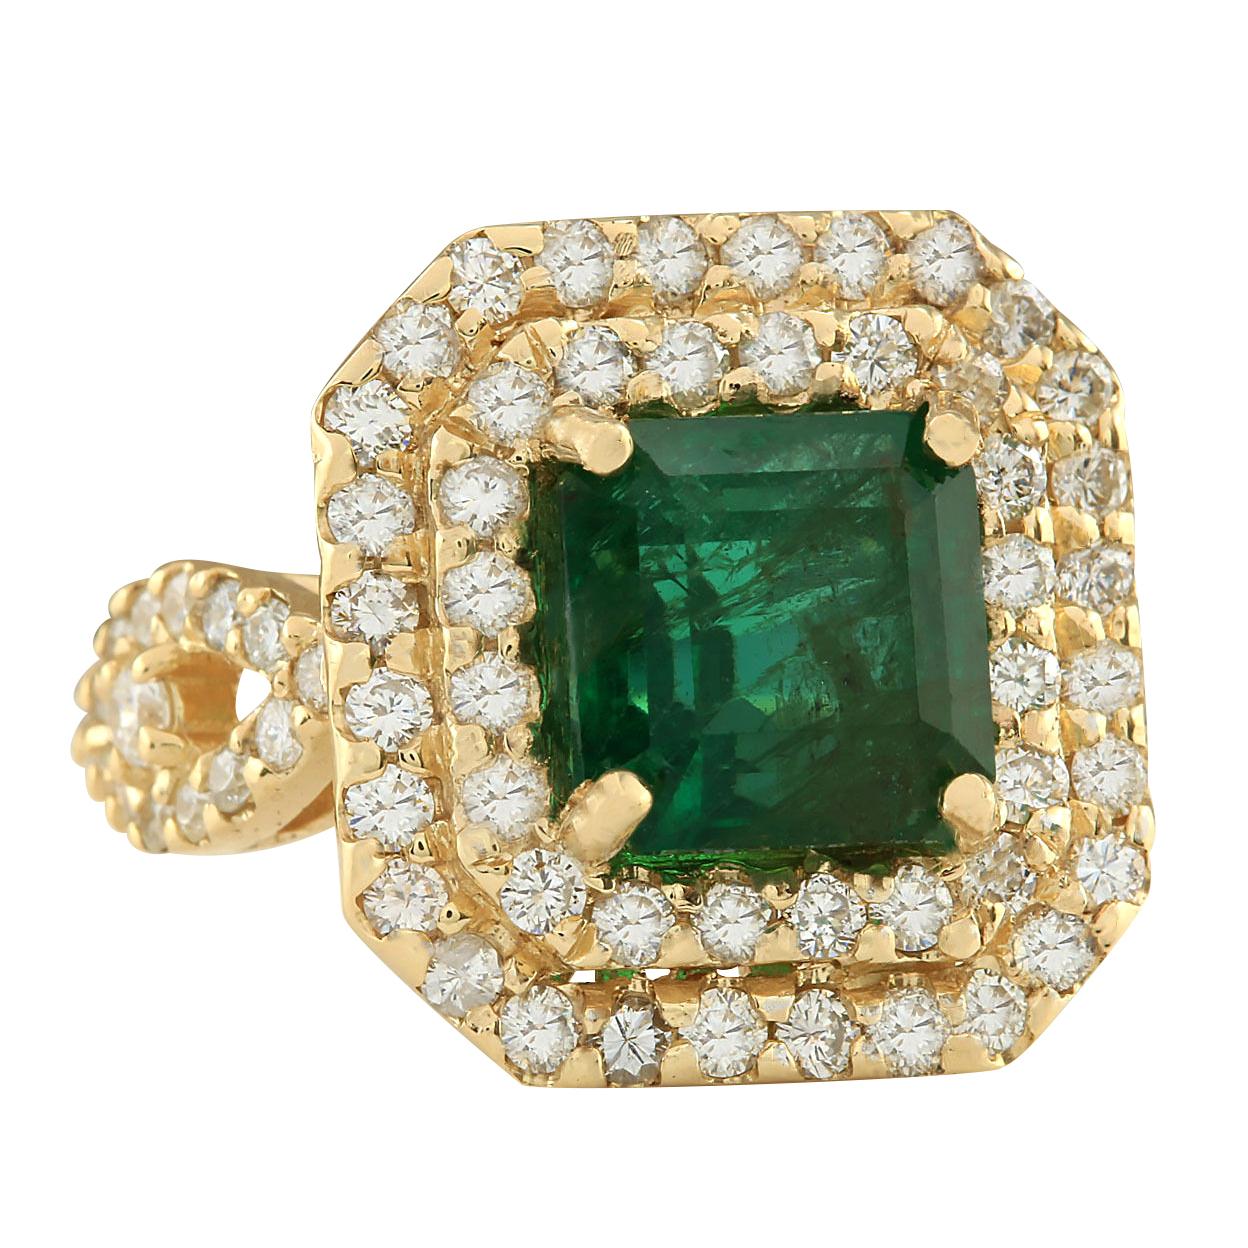 Introducing our stunning 6.10 Carat Emerald 14 Karat Yellow Gold Diamond Ring. Crafted from stamped 14K Yellow Gold, this ring weighs a total of 10.0 grams, ensuring both quality and durability. The centerpiece of this exquisite ring is a